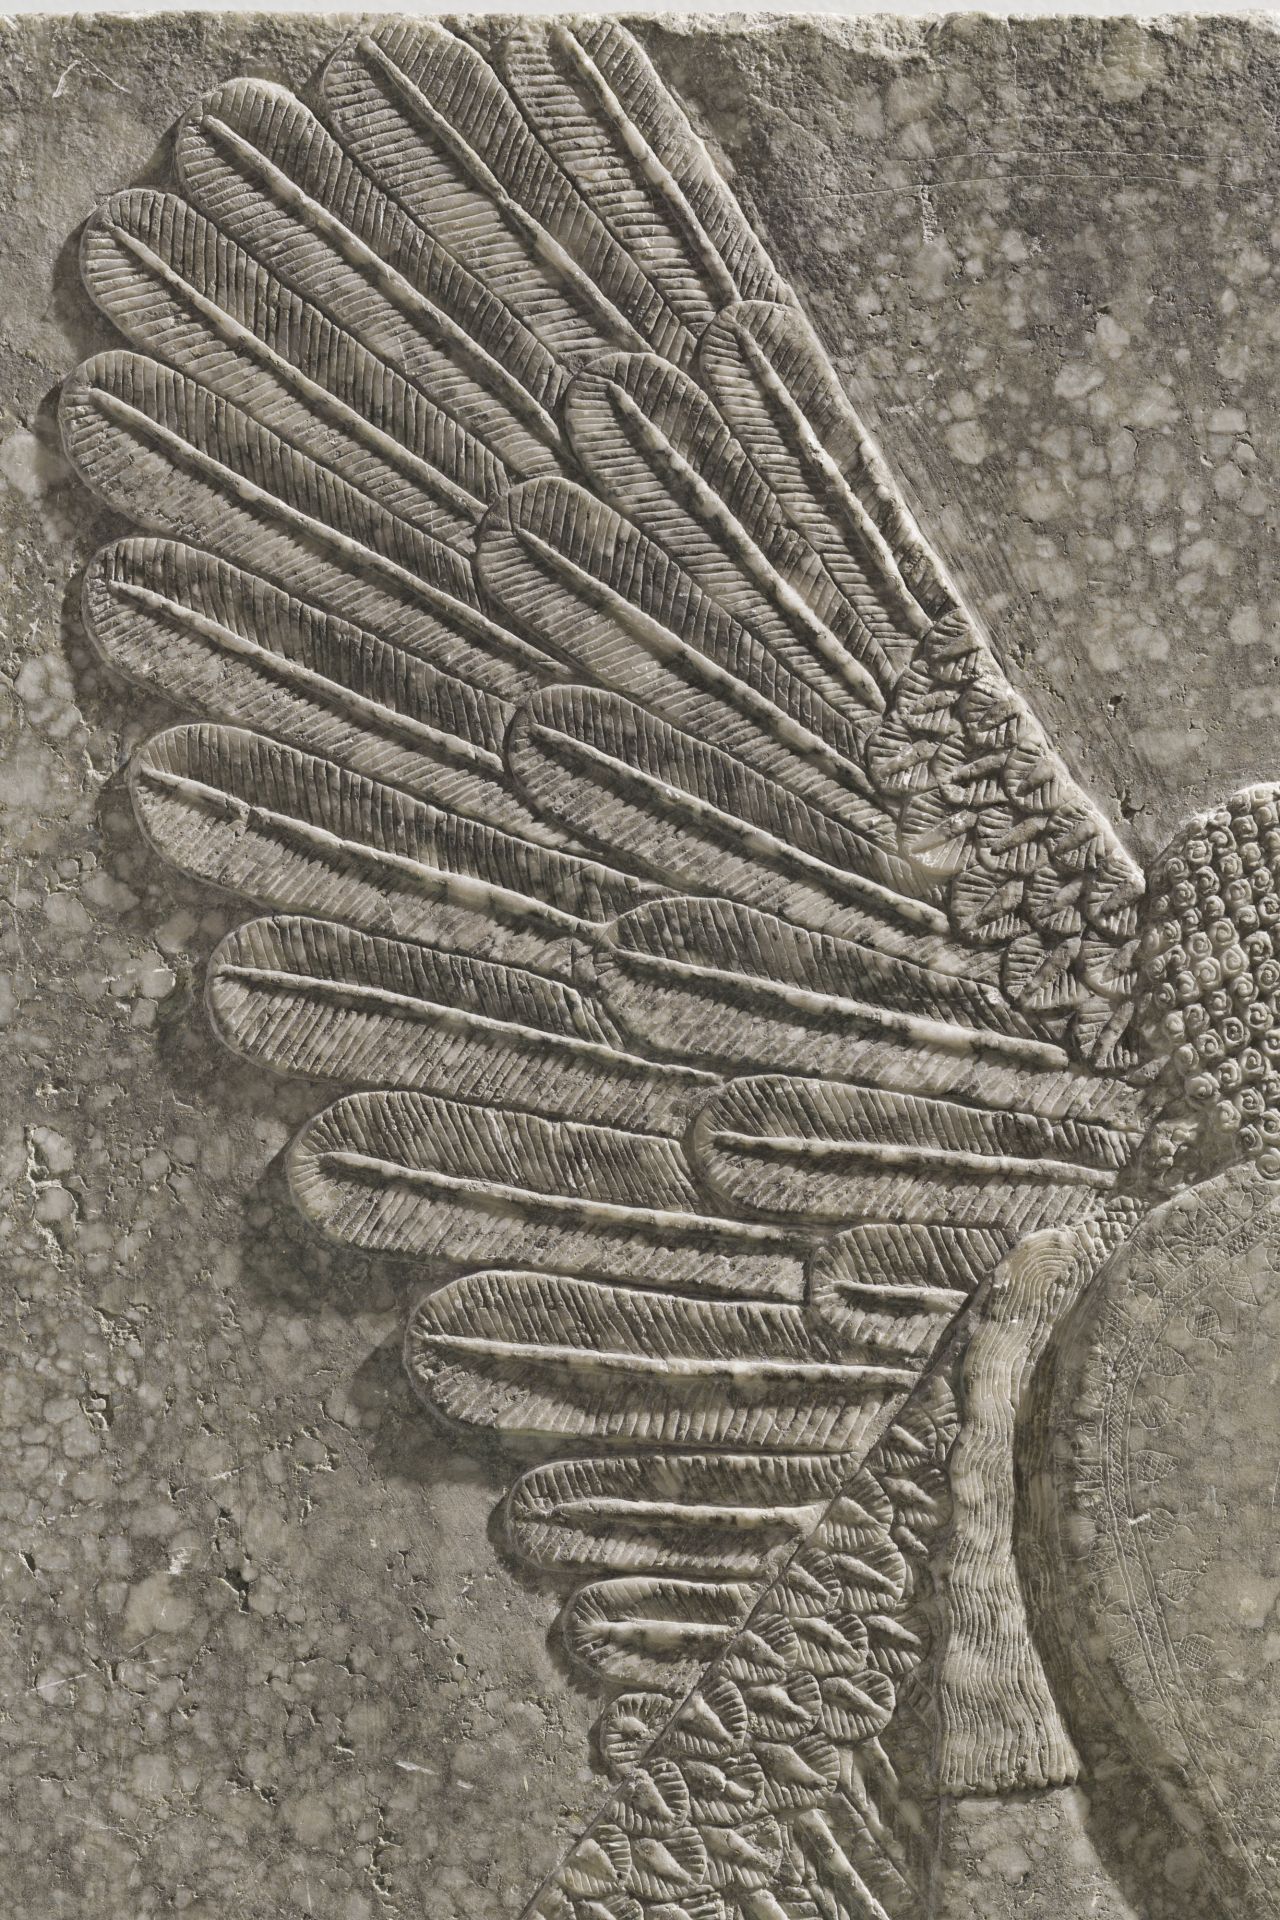 The feathers of his wings are intricately rendered.